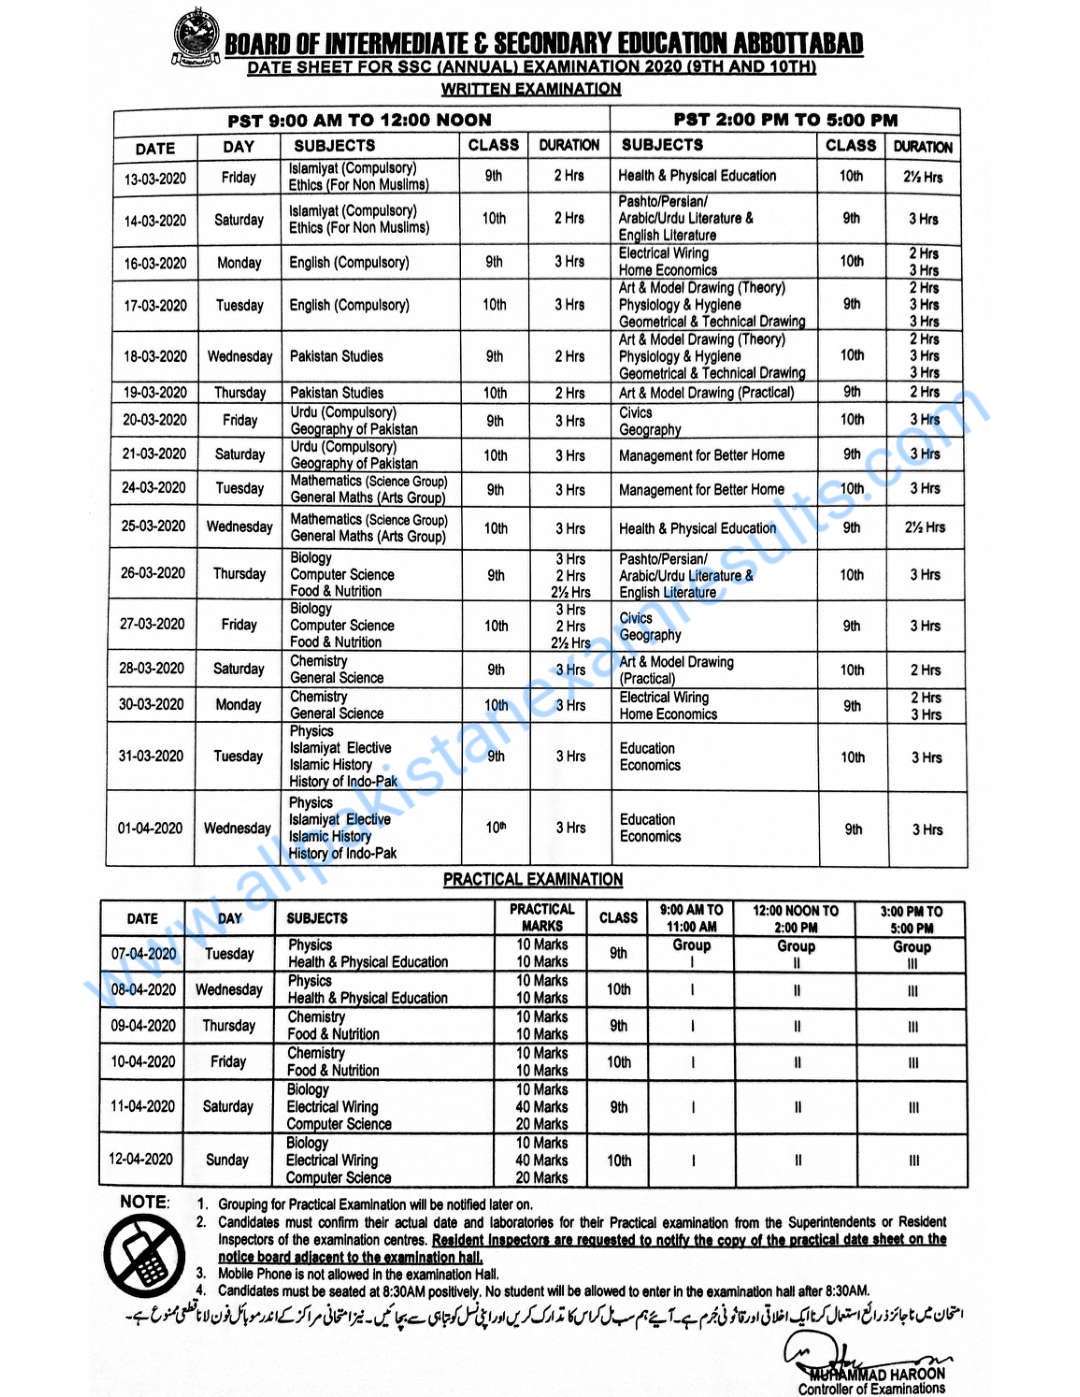 BISE Abbottabad 9th and 10th class Date Sheet 2020